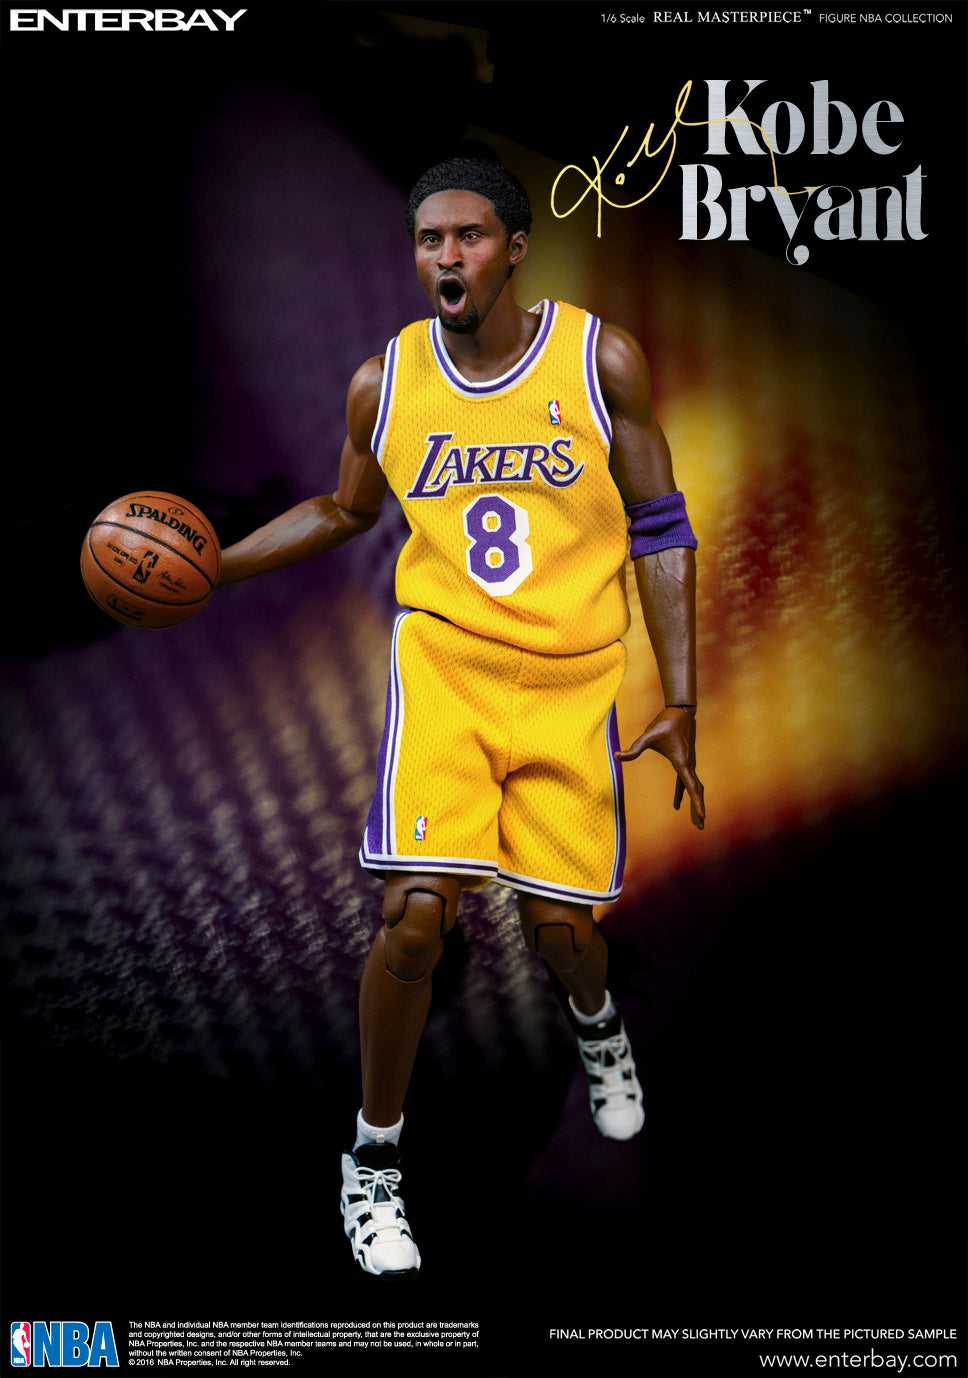 Enterbay - Real Masterpiece - NBA Collection - Kobe Bryant (New Upgraded Re-Edition) (1/6 Scale) - Marvelous Toys